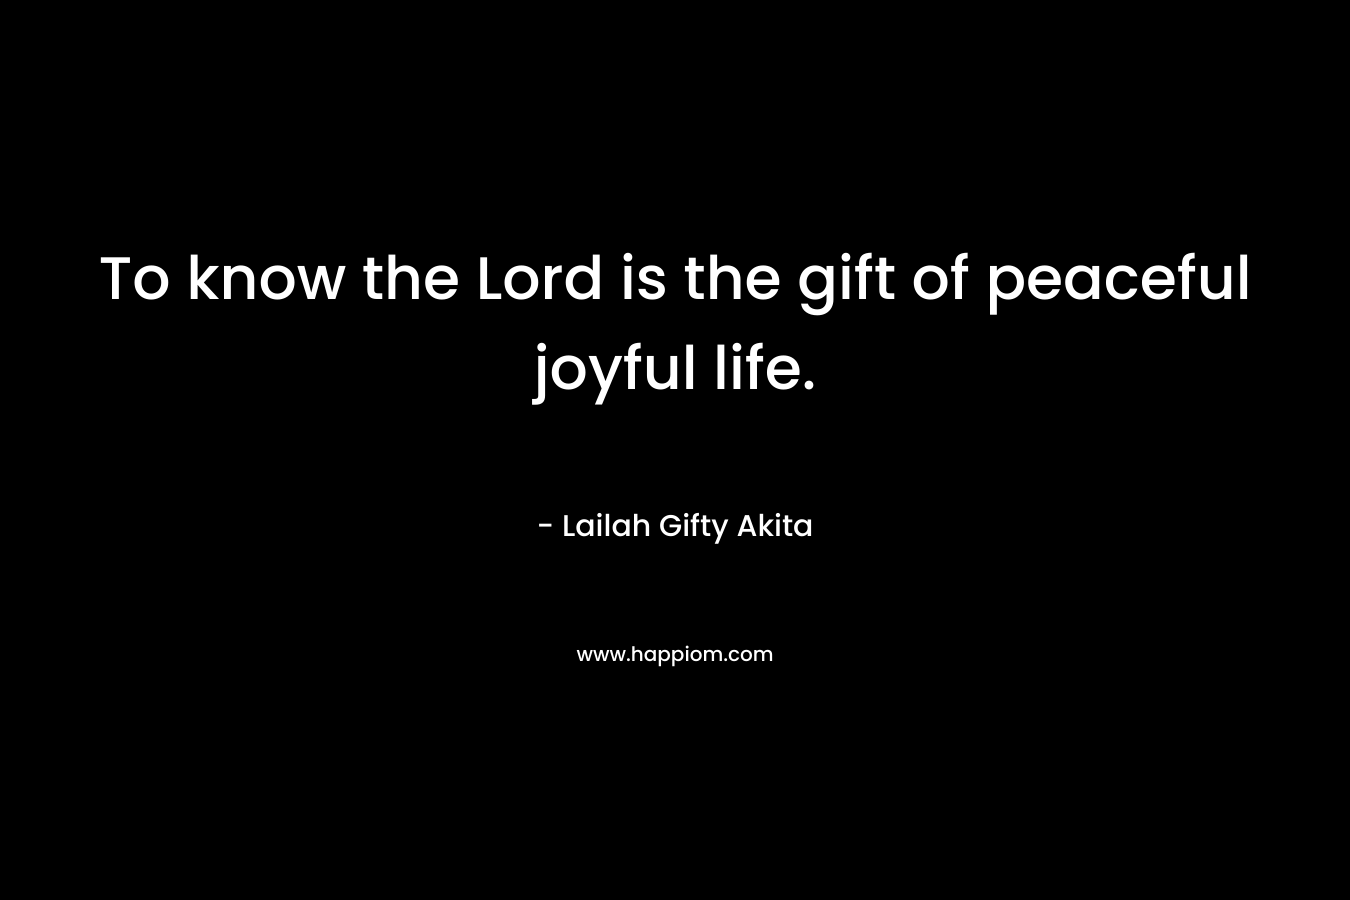 To know the Lord is the gift of peaceful joyful life.